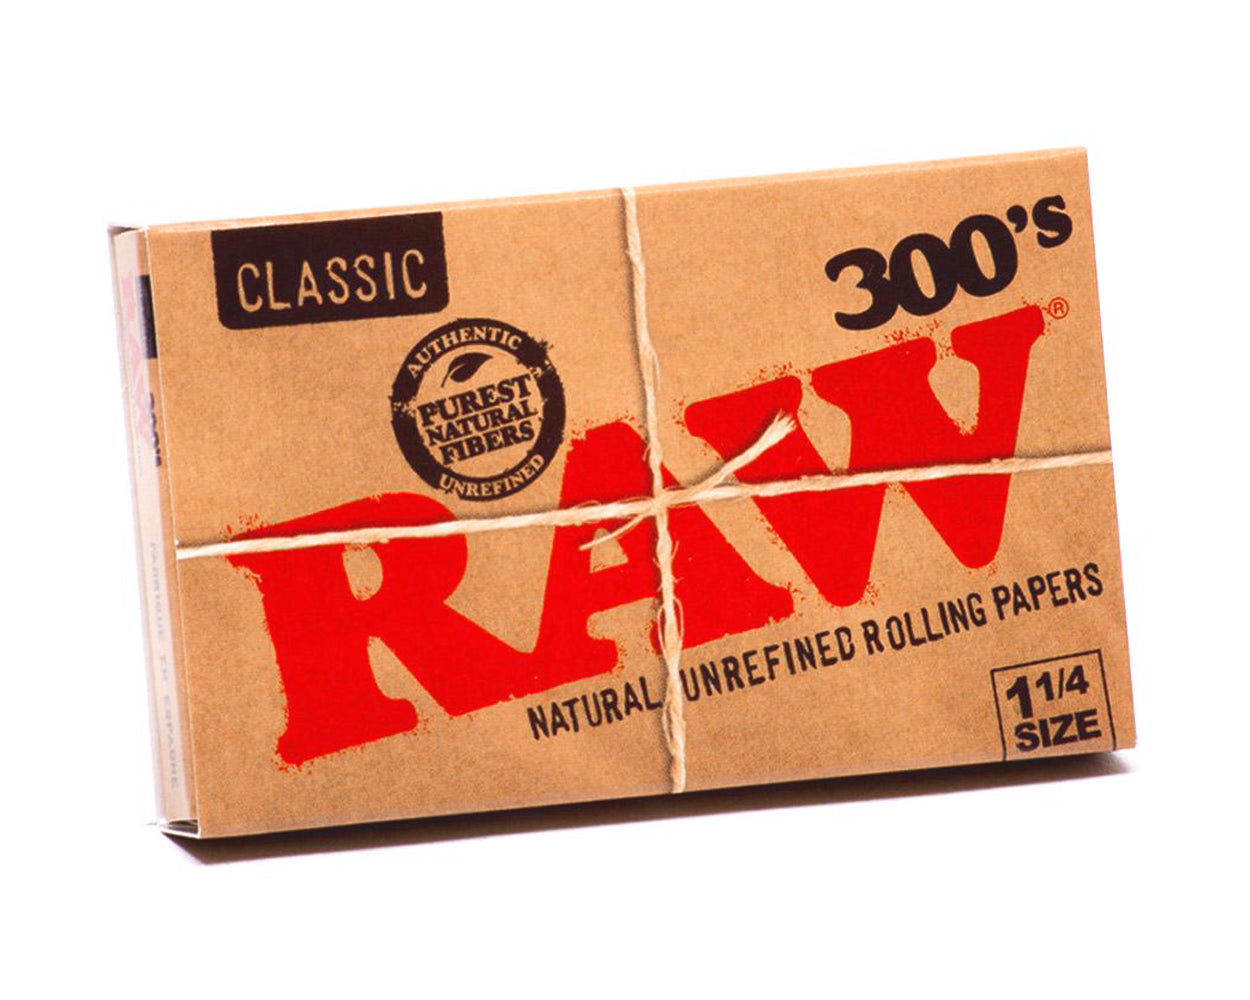 RAW | 'Retail Display' 300's 1 1/4 Size Rolling Papers | 83mm - Classic - 40 Count - 3